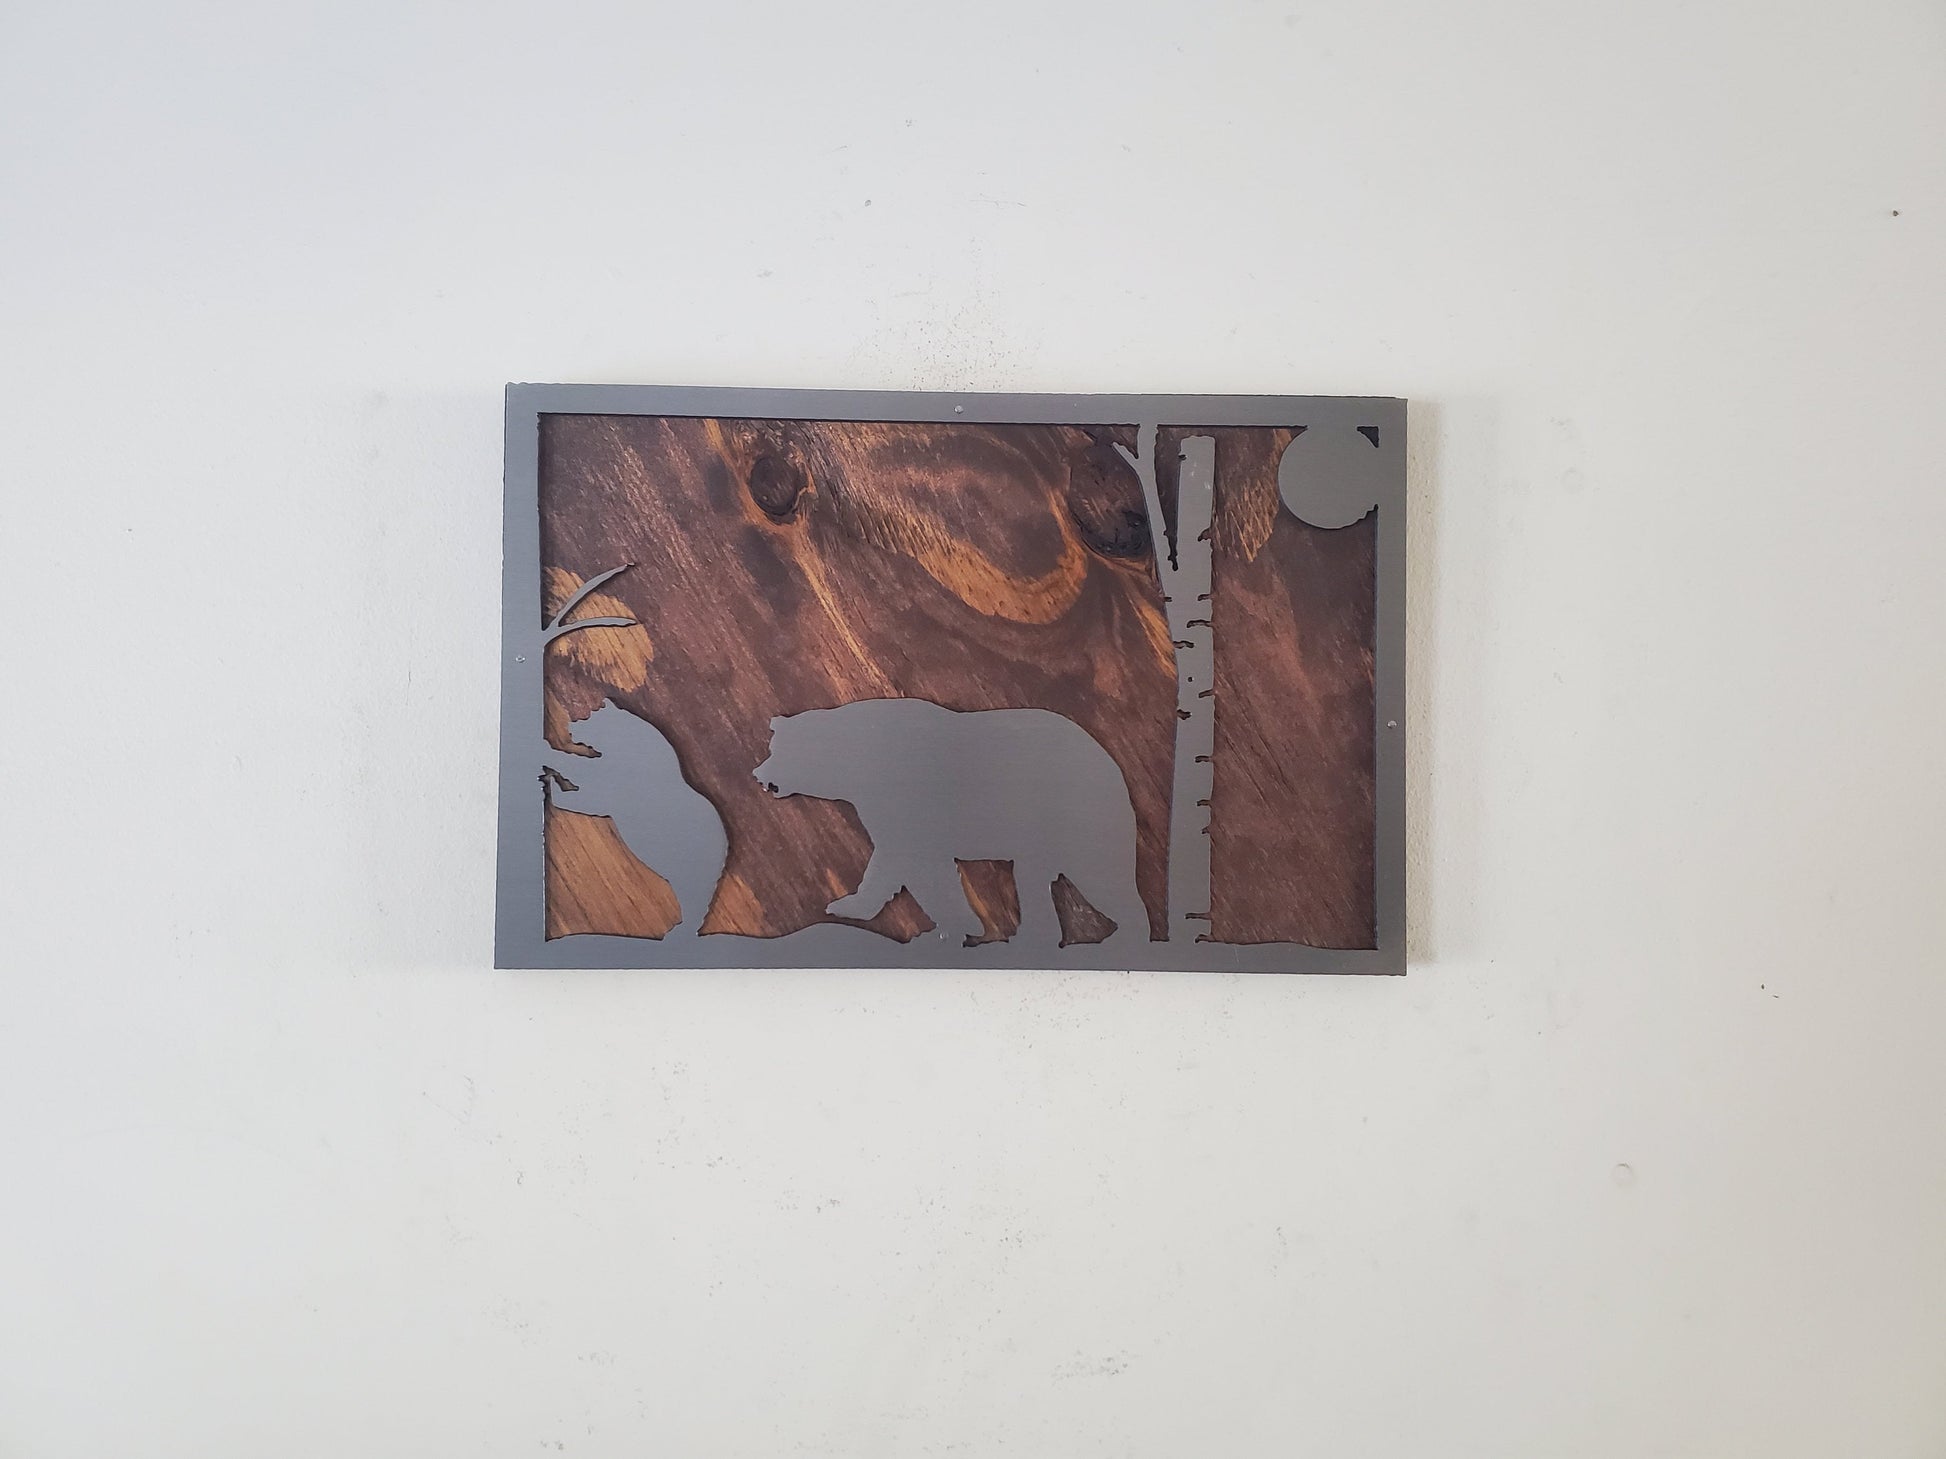 A close-up of a bear scene metal art wall decor made of clear coated steel, featuring intricate details and textures of a bear in its natural habitat. A perfect addition to any nature lover's home or office decor.